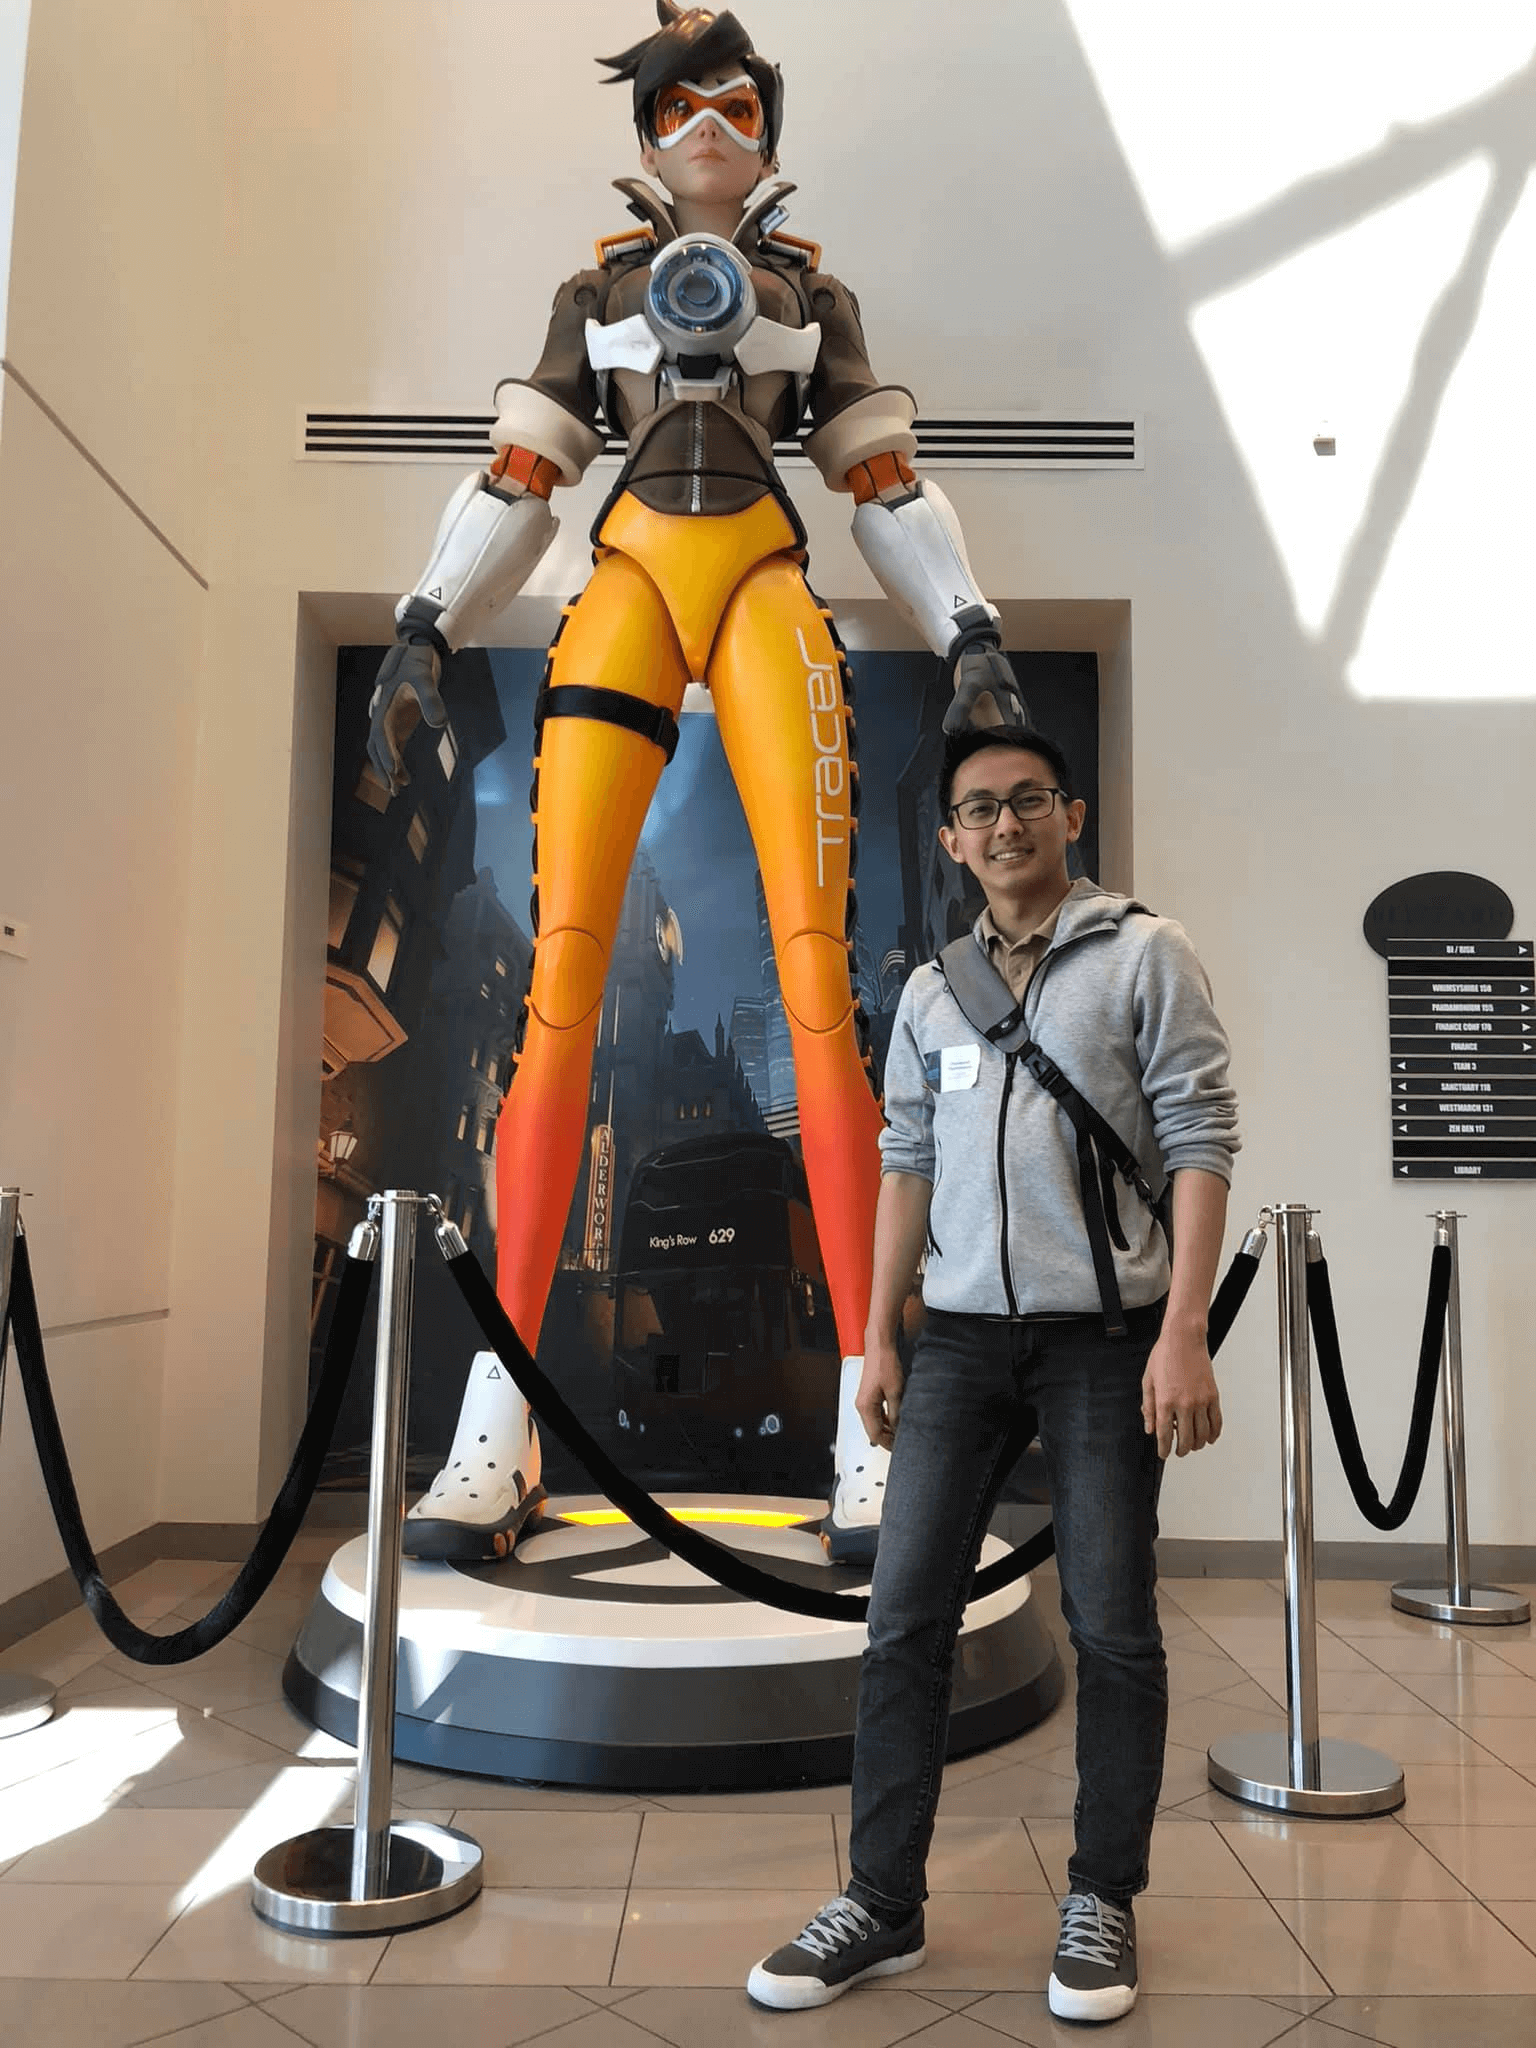 Chonlawat “Takki” Thammawan poses in front of a giant statue of the Overwatch 2 character Tracer.